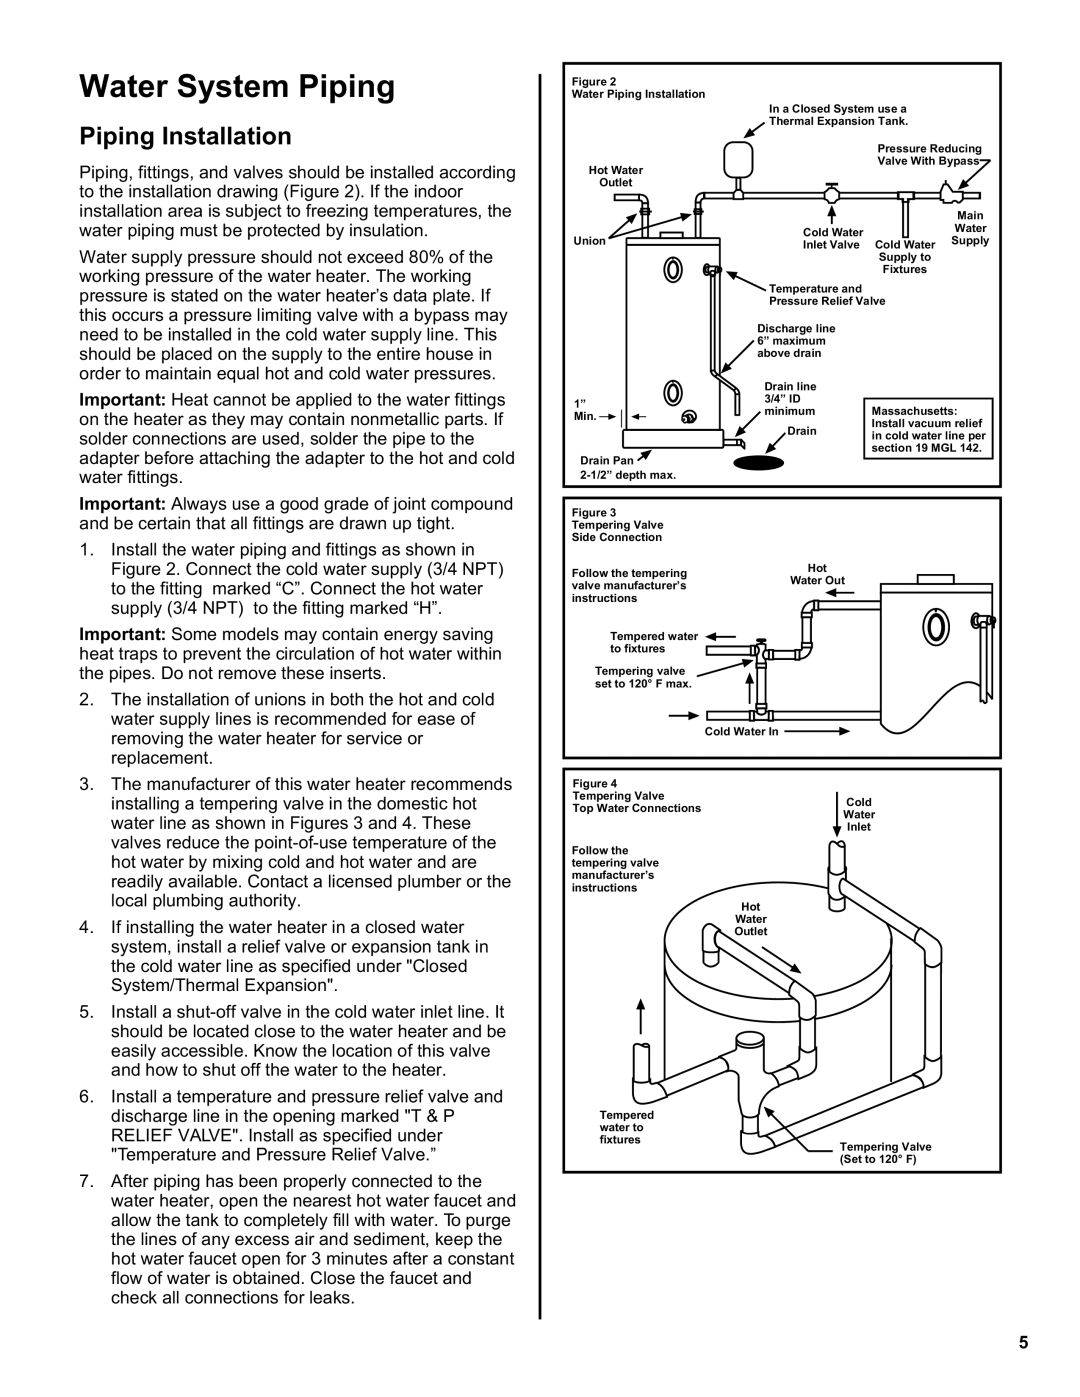 Whirlpool EE2H40RD045V, 188413, 188410, 188412, 188414 installation instructions Water System Piping, Piping Installation 